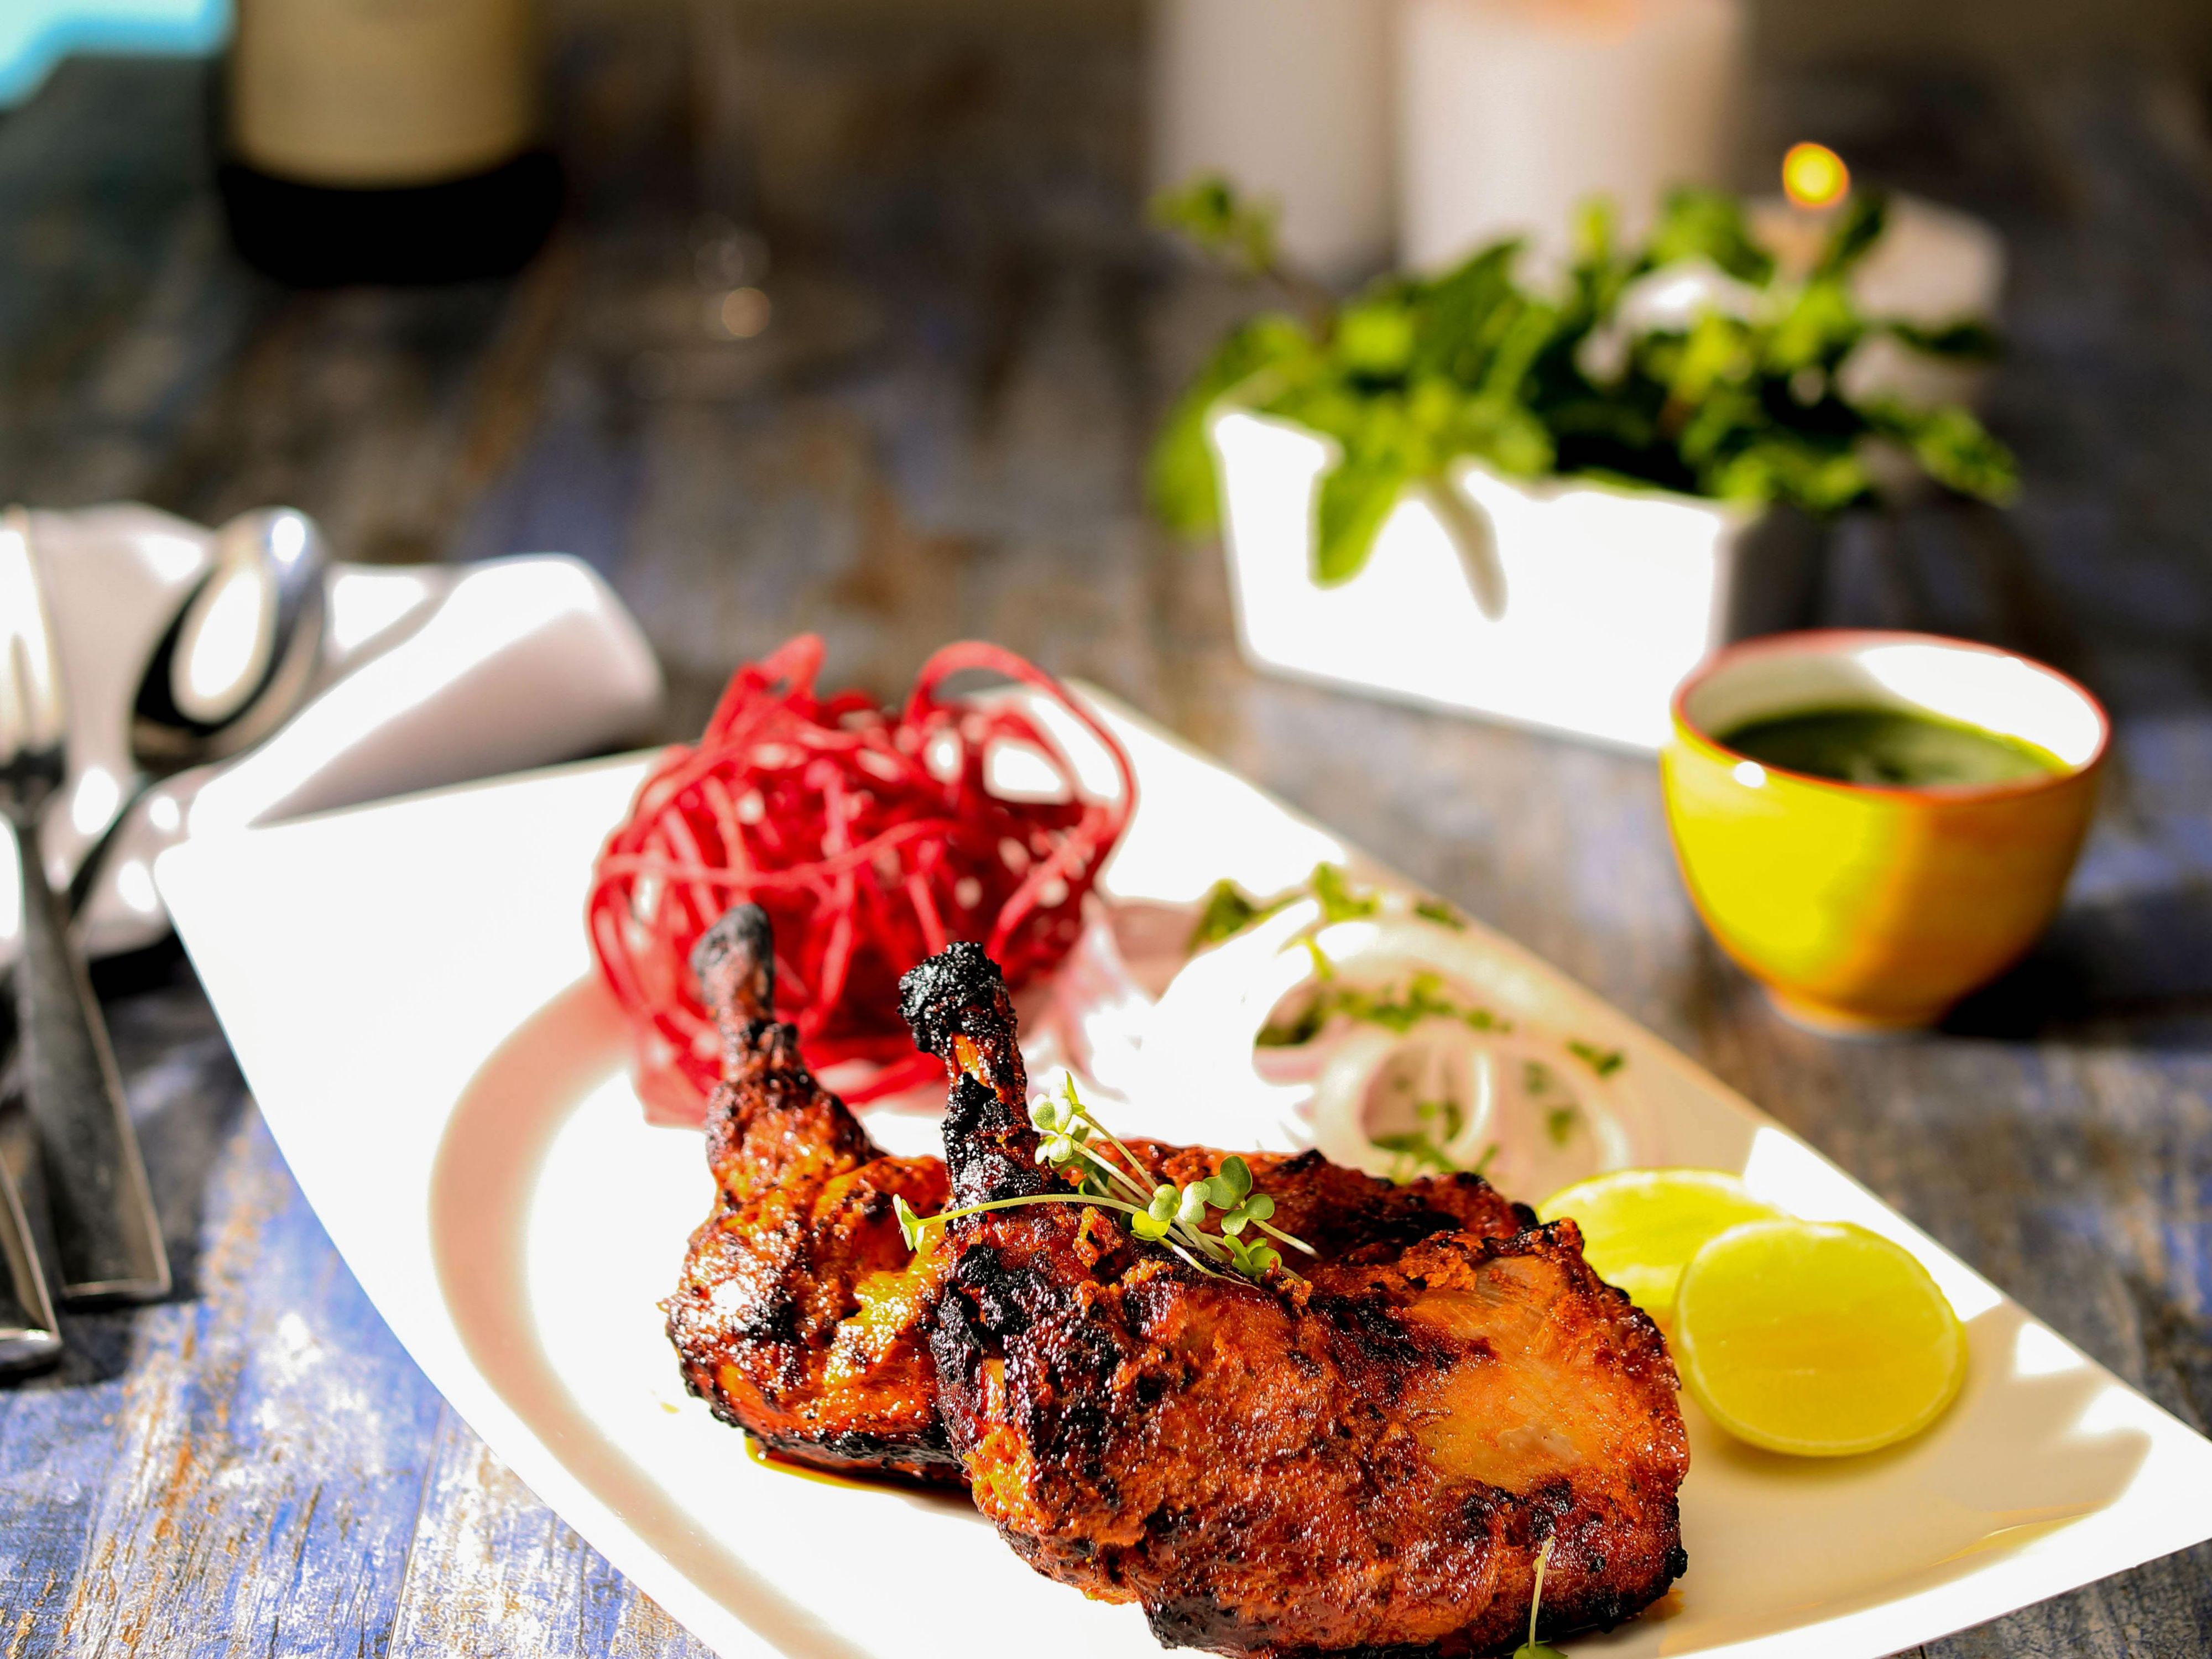 Grilled delights at Mosaic Restaurant